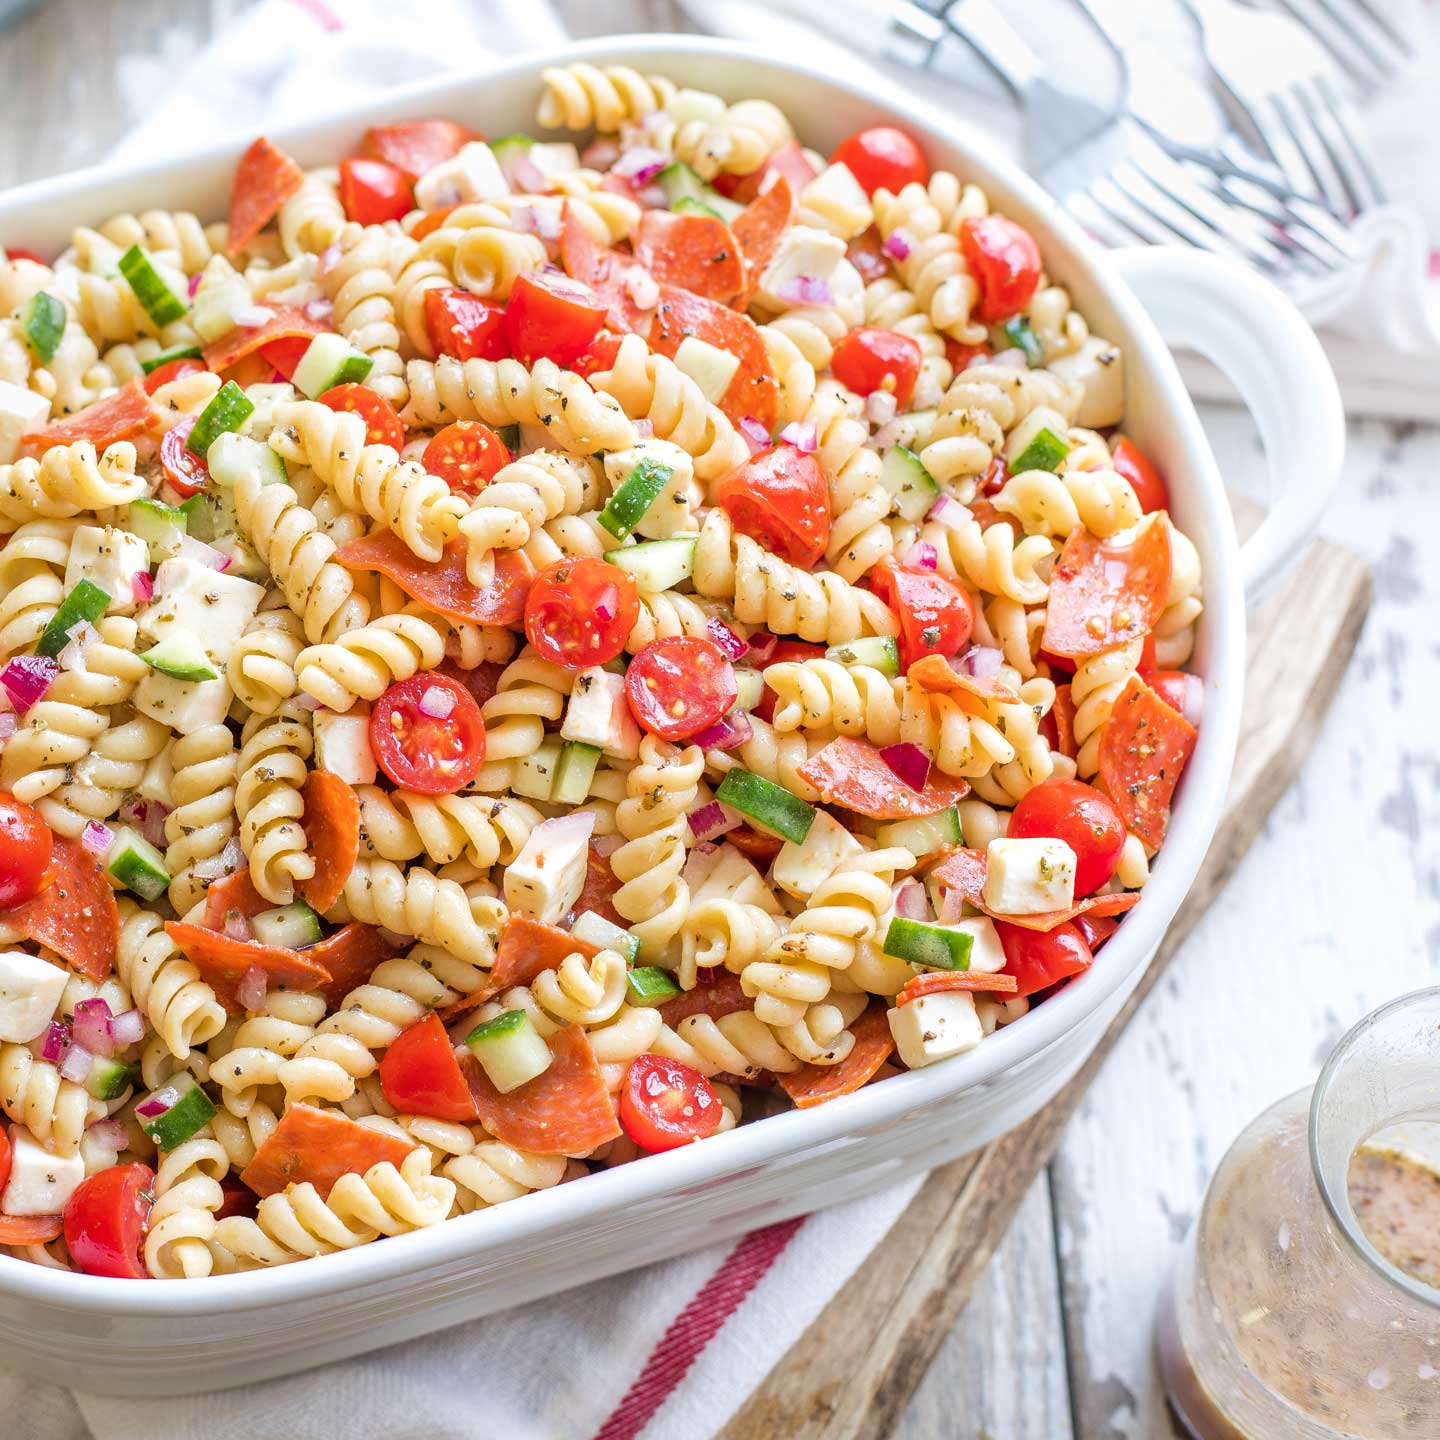 Italian pasta salad with turkey pepperoni and homemade dressing in a casserole dish.